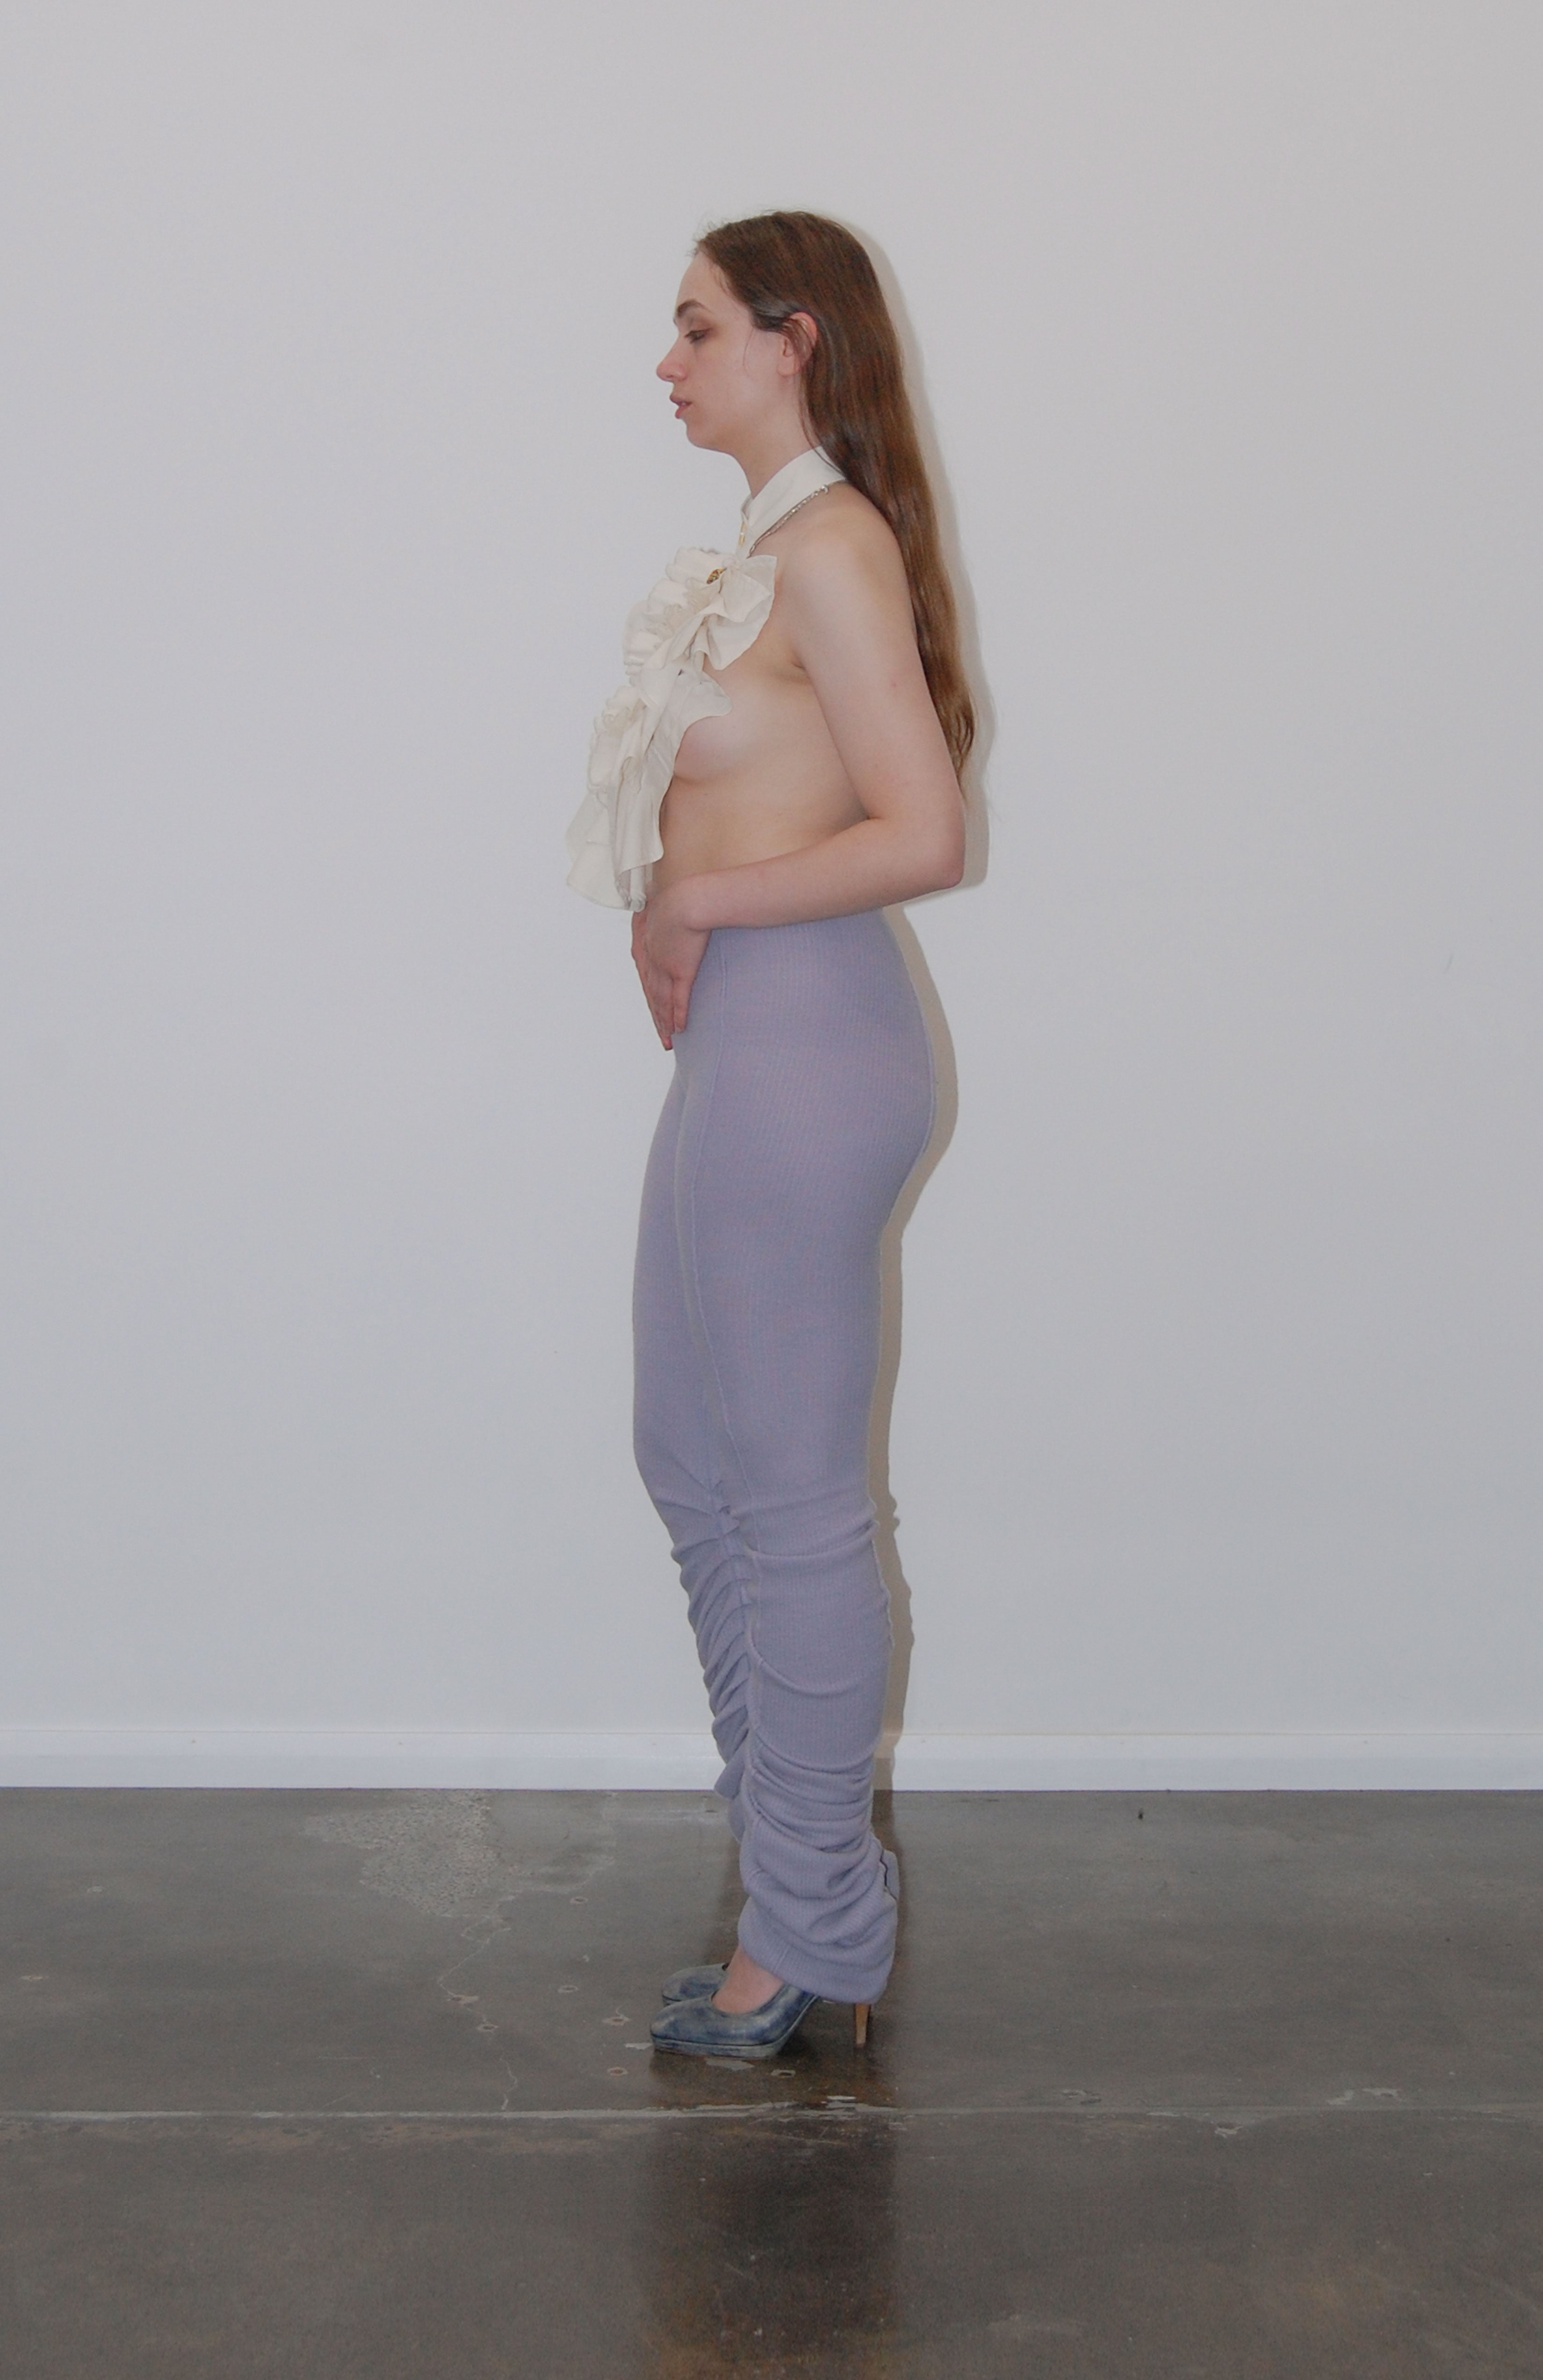 Maroske Peech High-rise wool-blend warm-up lilac leggings. Pleated inseam starts from the knee for a lamb leg effect. Flattering pin tucks run along the back and front of both legs giving you visual cues to correct your lines in the mirror.